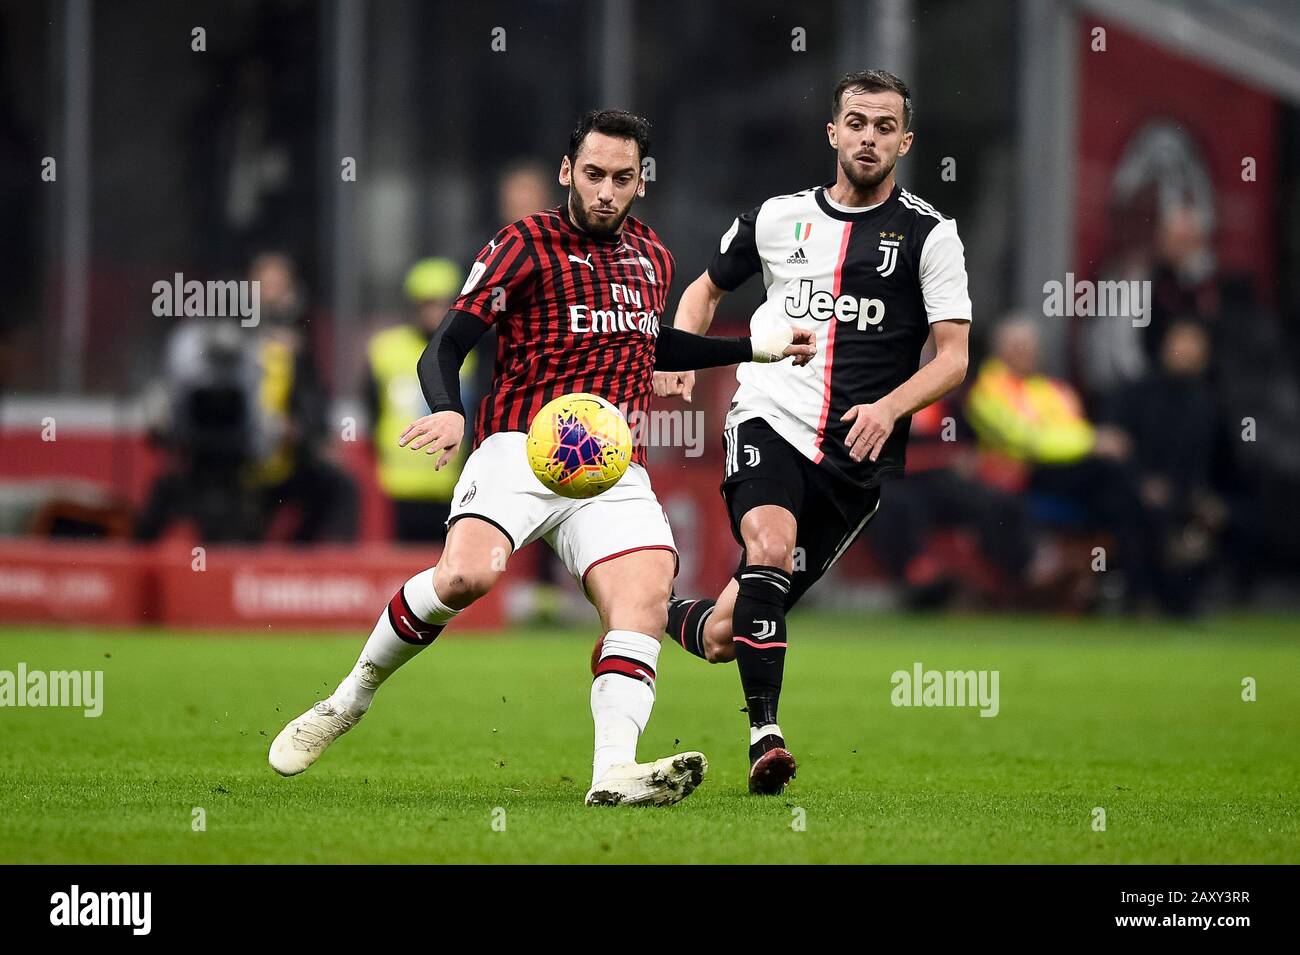 Milan, Italy - 13 February, 2020: Hakan Calhanoglu (L) of AC Milan is challenged by Miralem Pjanic of Juventus FC during the Coppa Italia semi final football match between AC Milan and Juventus FC. Credit: Nicolò Campo/Alamy Live News Stock Photo